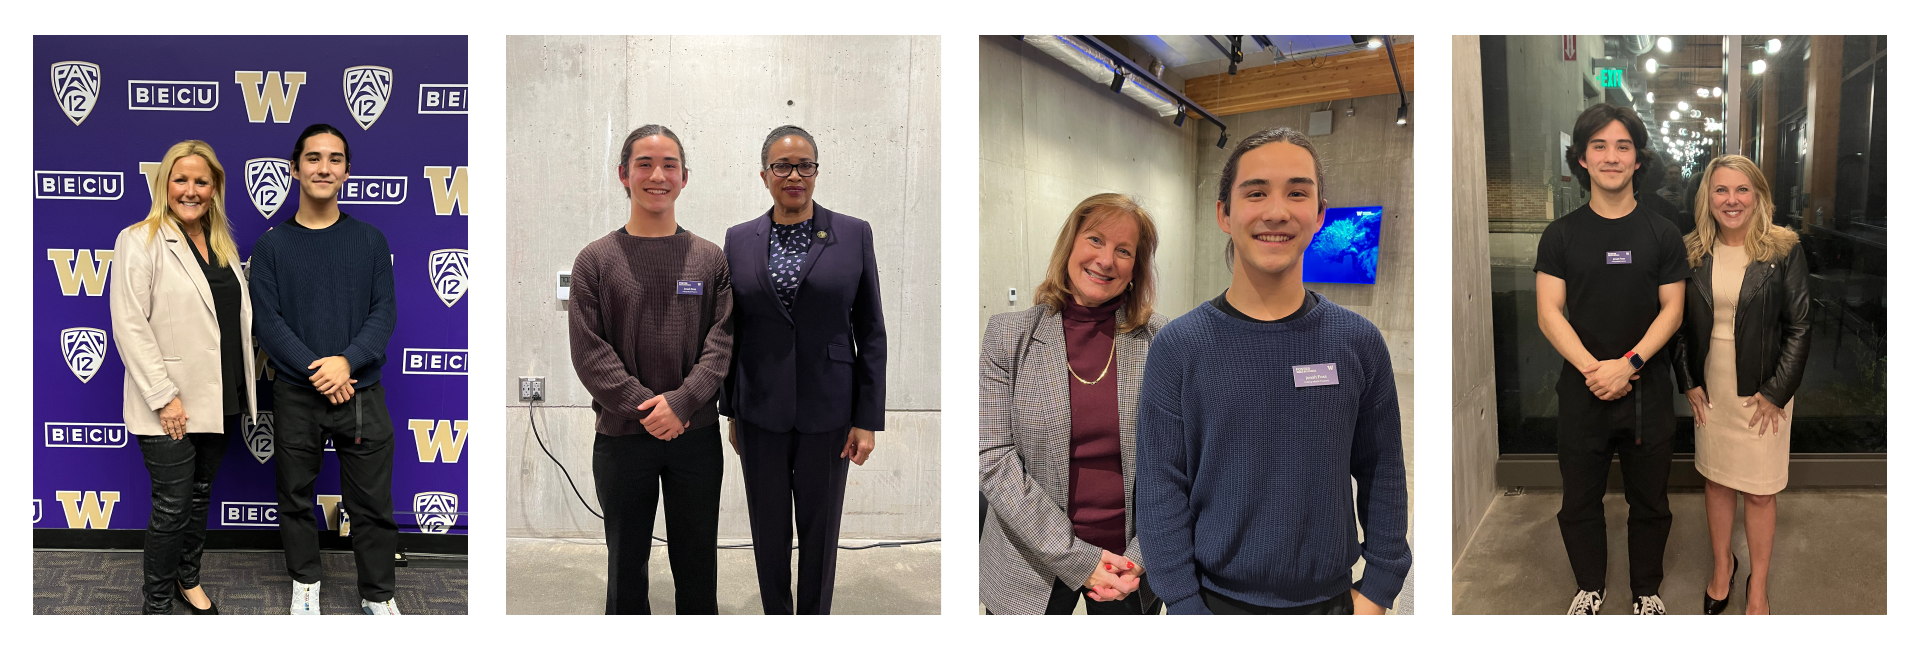 From left to right: UW Athletic Director Jen Cohen, First Lady of Seattle Joanne Harrel, SVP of Commercial & Business Services at BECU Dana Gray, and Executive Vice President of Advisor Group Erinn Ford.